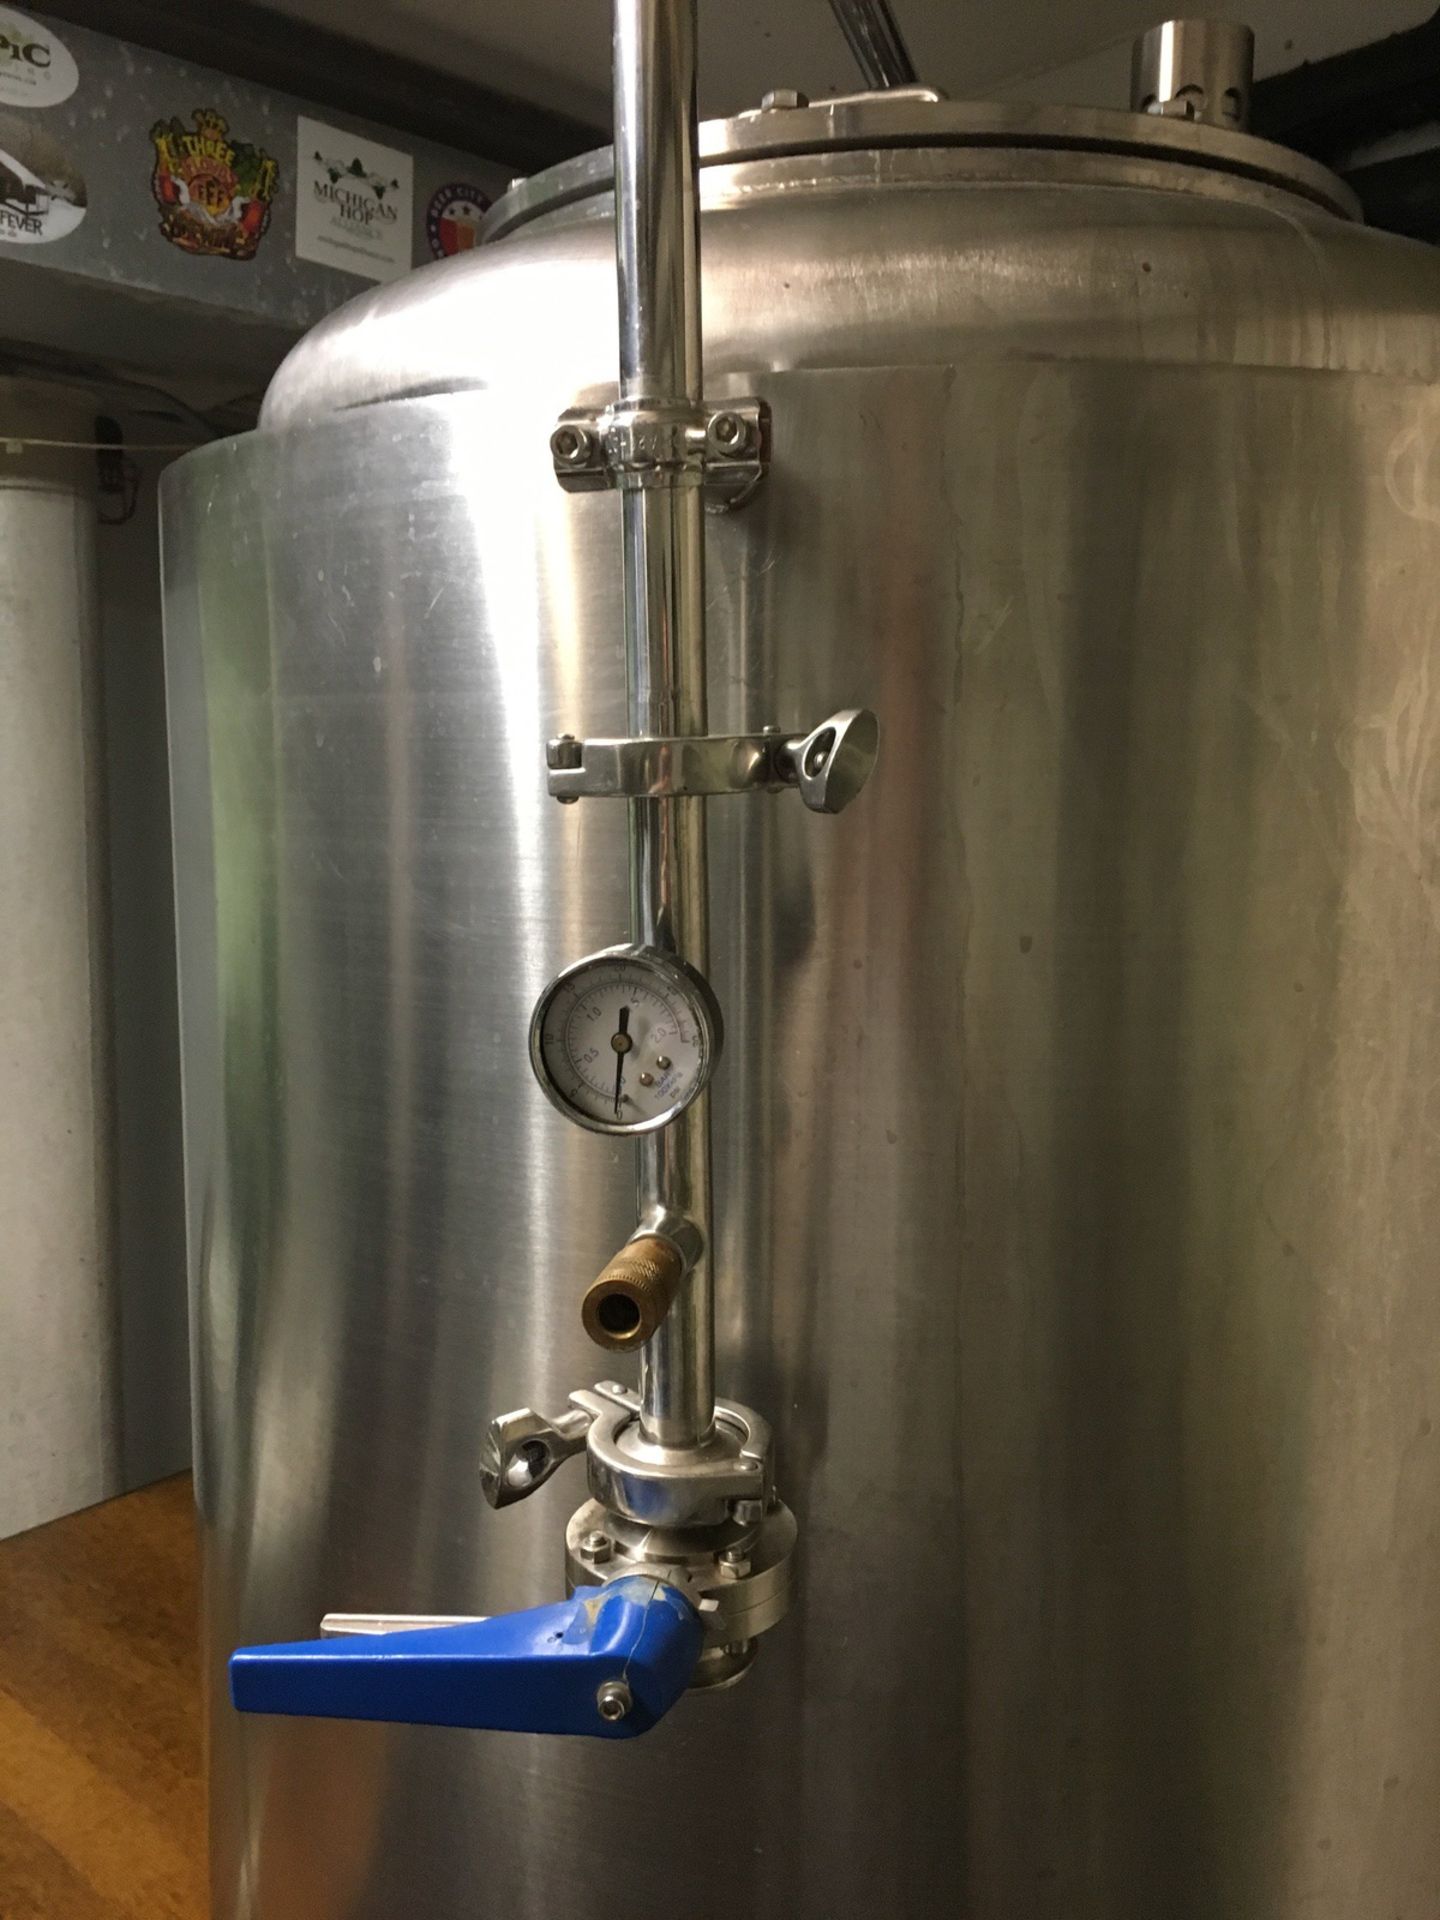 2007 3.5 BBL Stainless Steel Jacketed Fermenter | Subject to Bulk | Rig Fee: $175 - Image 5 of 6